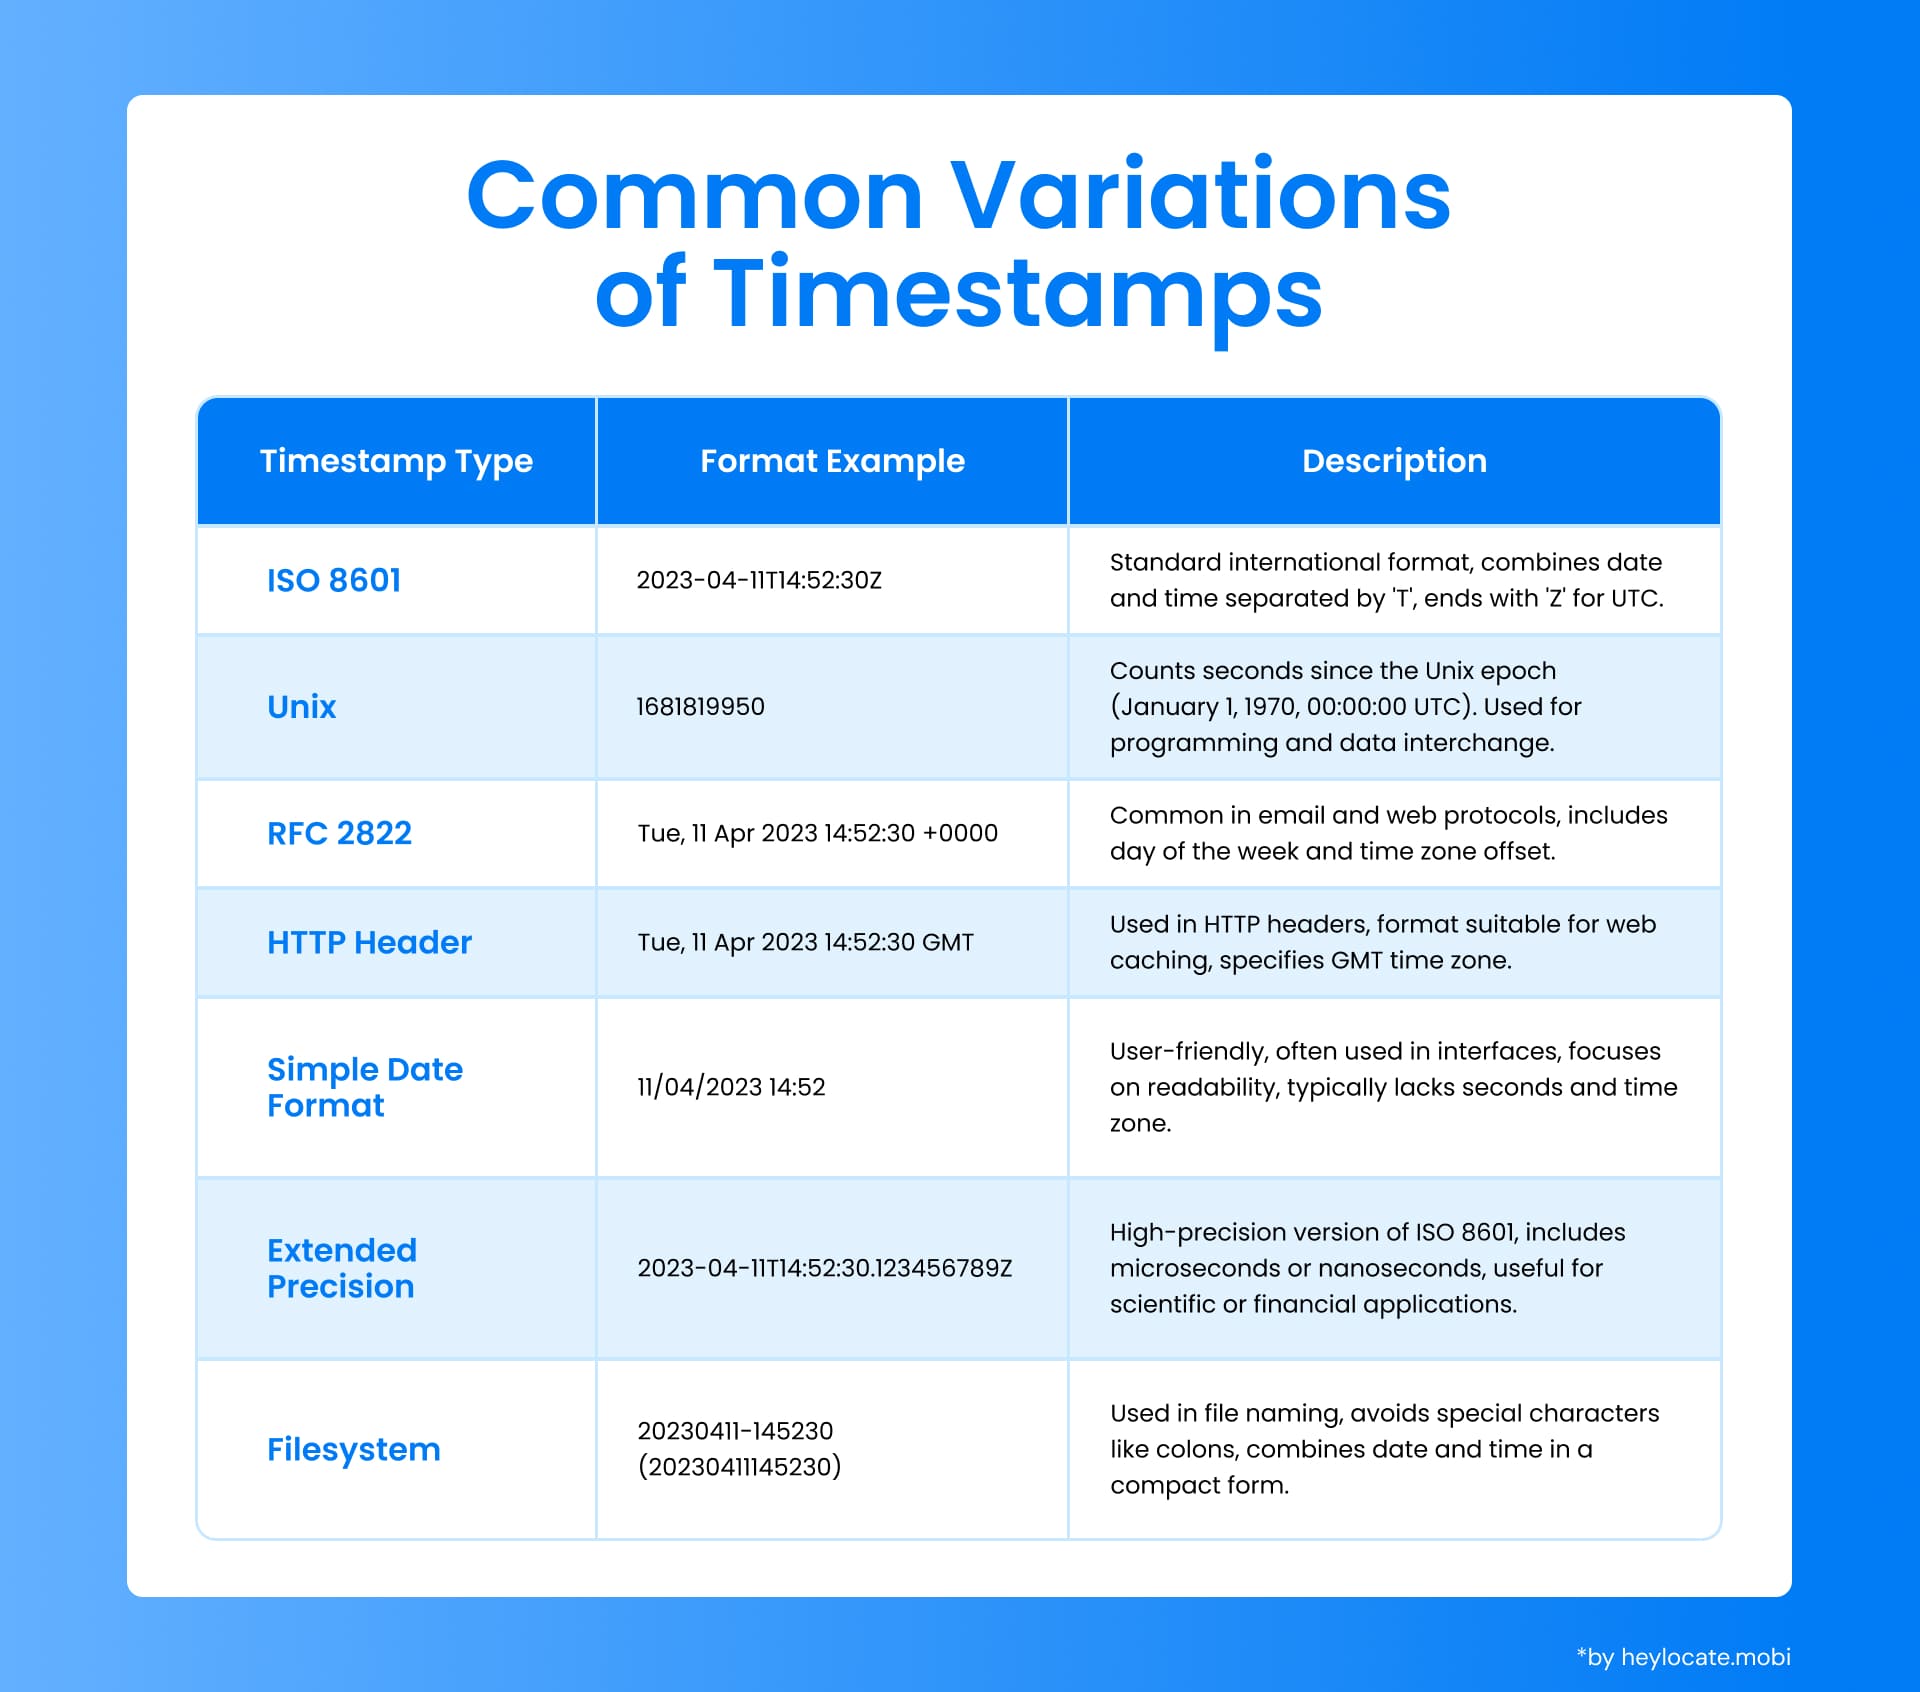 Infographic showing different timestamp formats and descriptions, including ISO 8601, Unix Timestamps, RFC 2822, HTTP header, simple date, extended precision, and filesystem